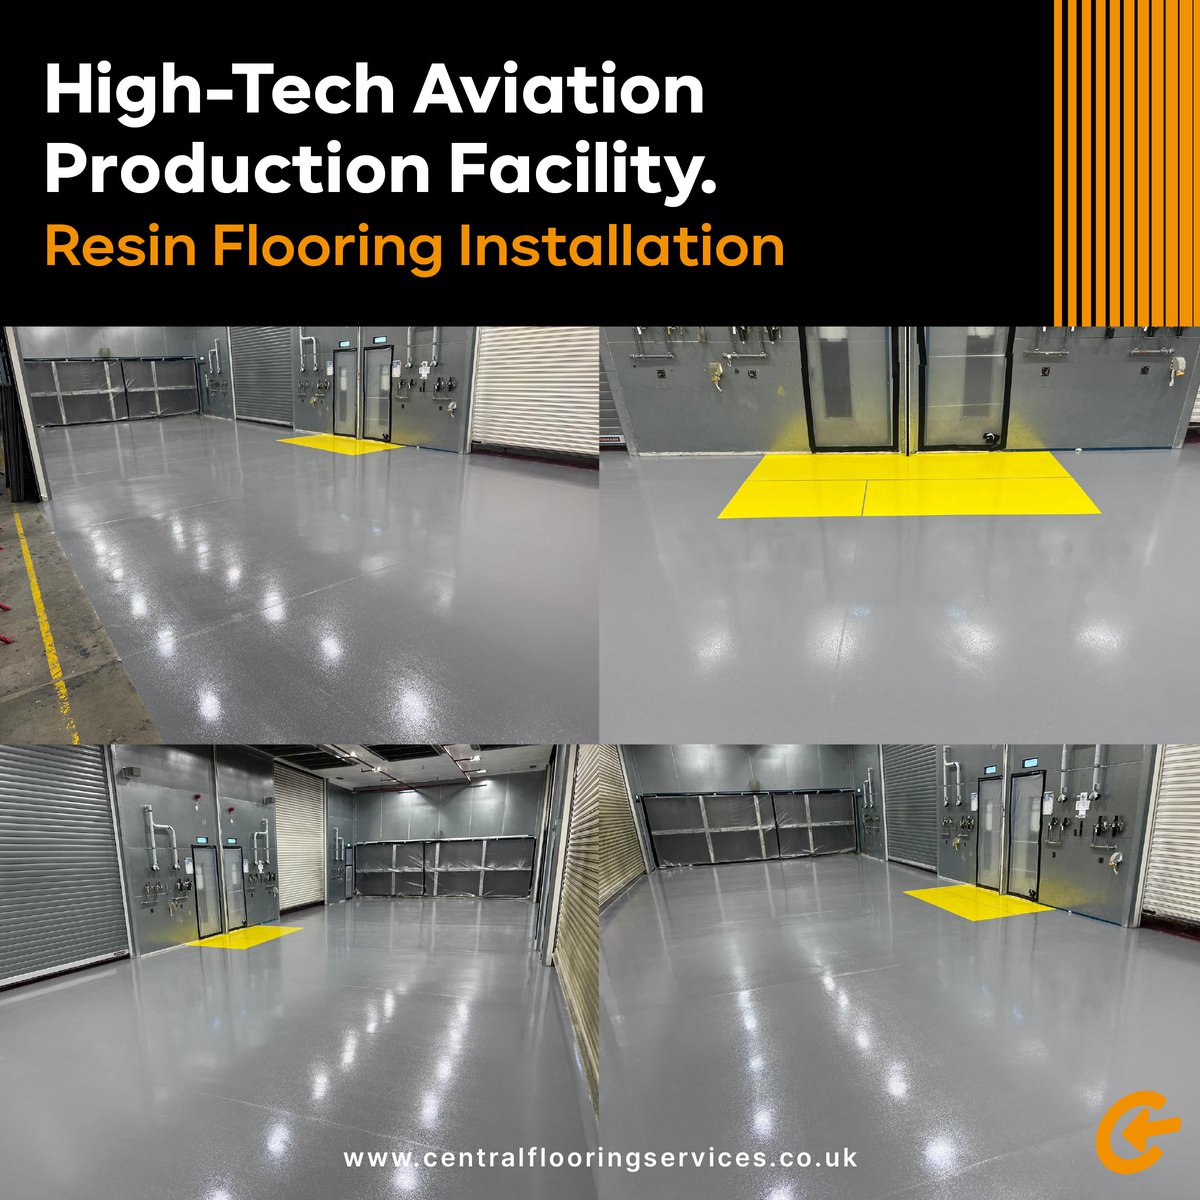 🚀 #ResinFlooring for #Aerospace Leaders 🚀

We're thrilled to reveal our latest feat: a top-tier #ResinFloor installation using #Pumaflow and #Pumatect in a high-tech #Aviation facility.